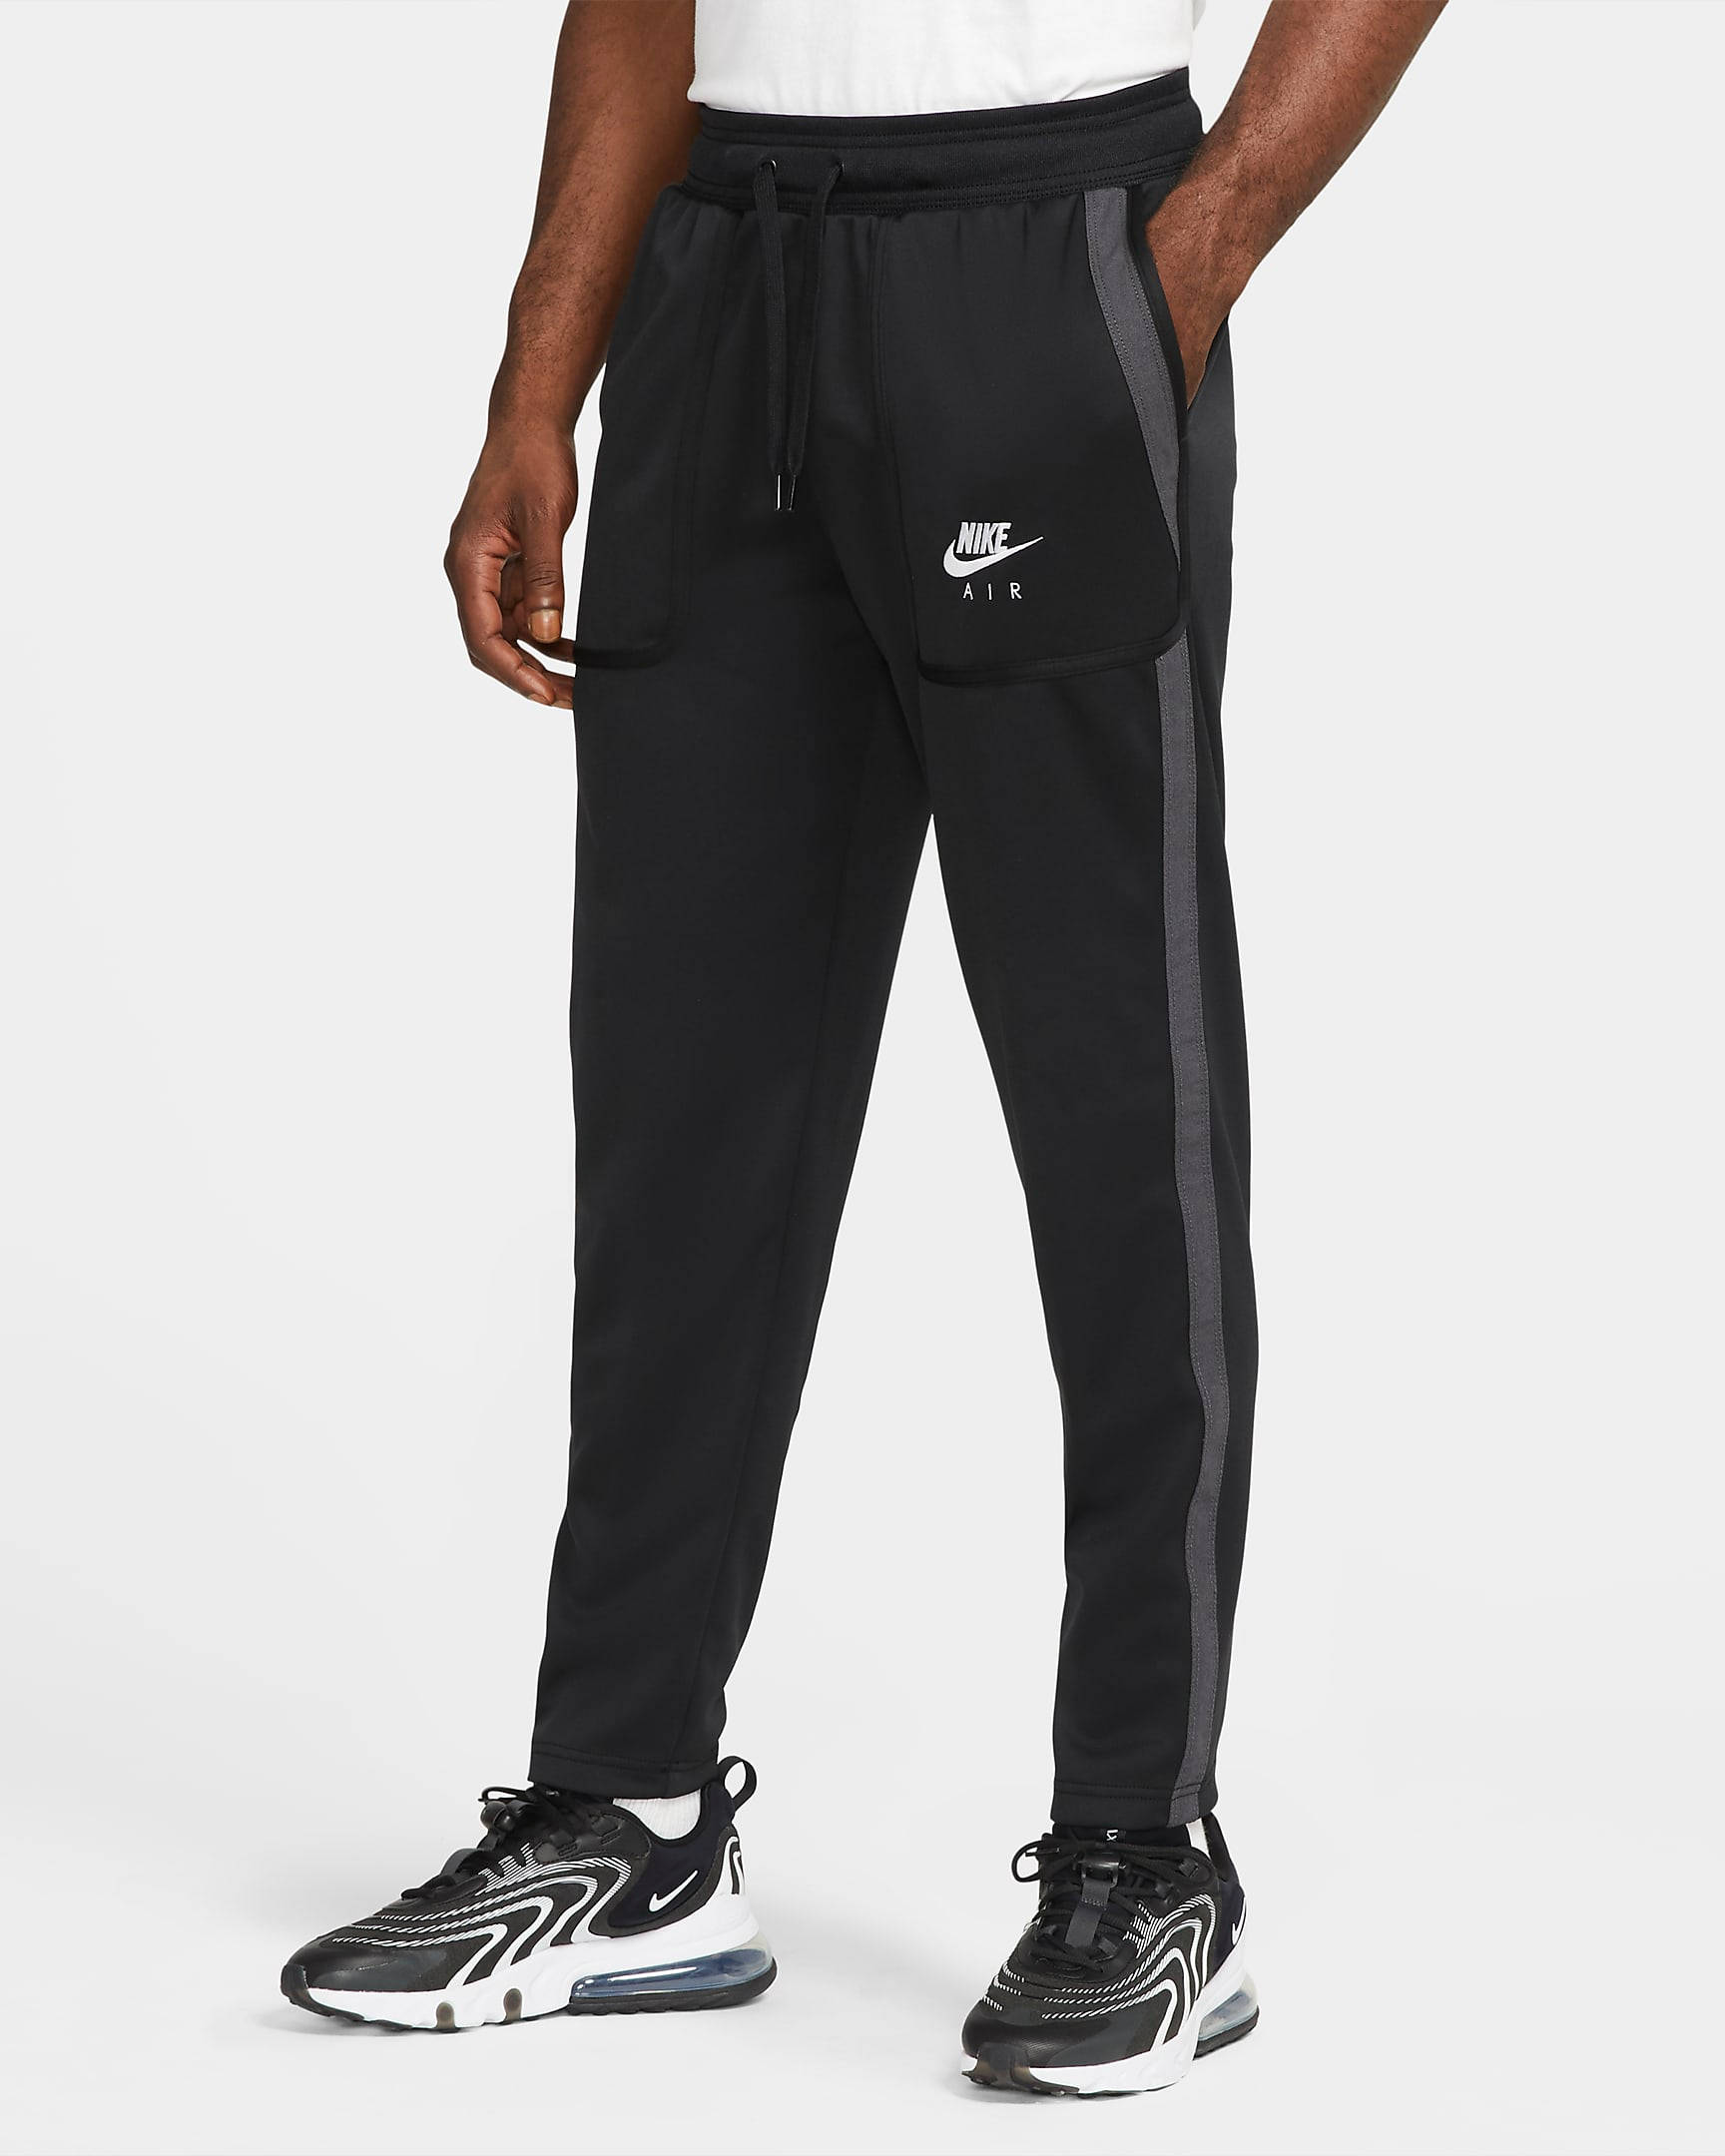 Nike Air Trousers - Black | The Sole Supplier